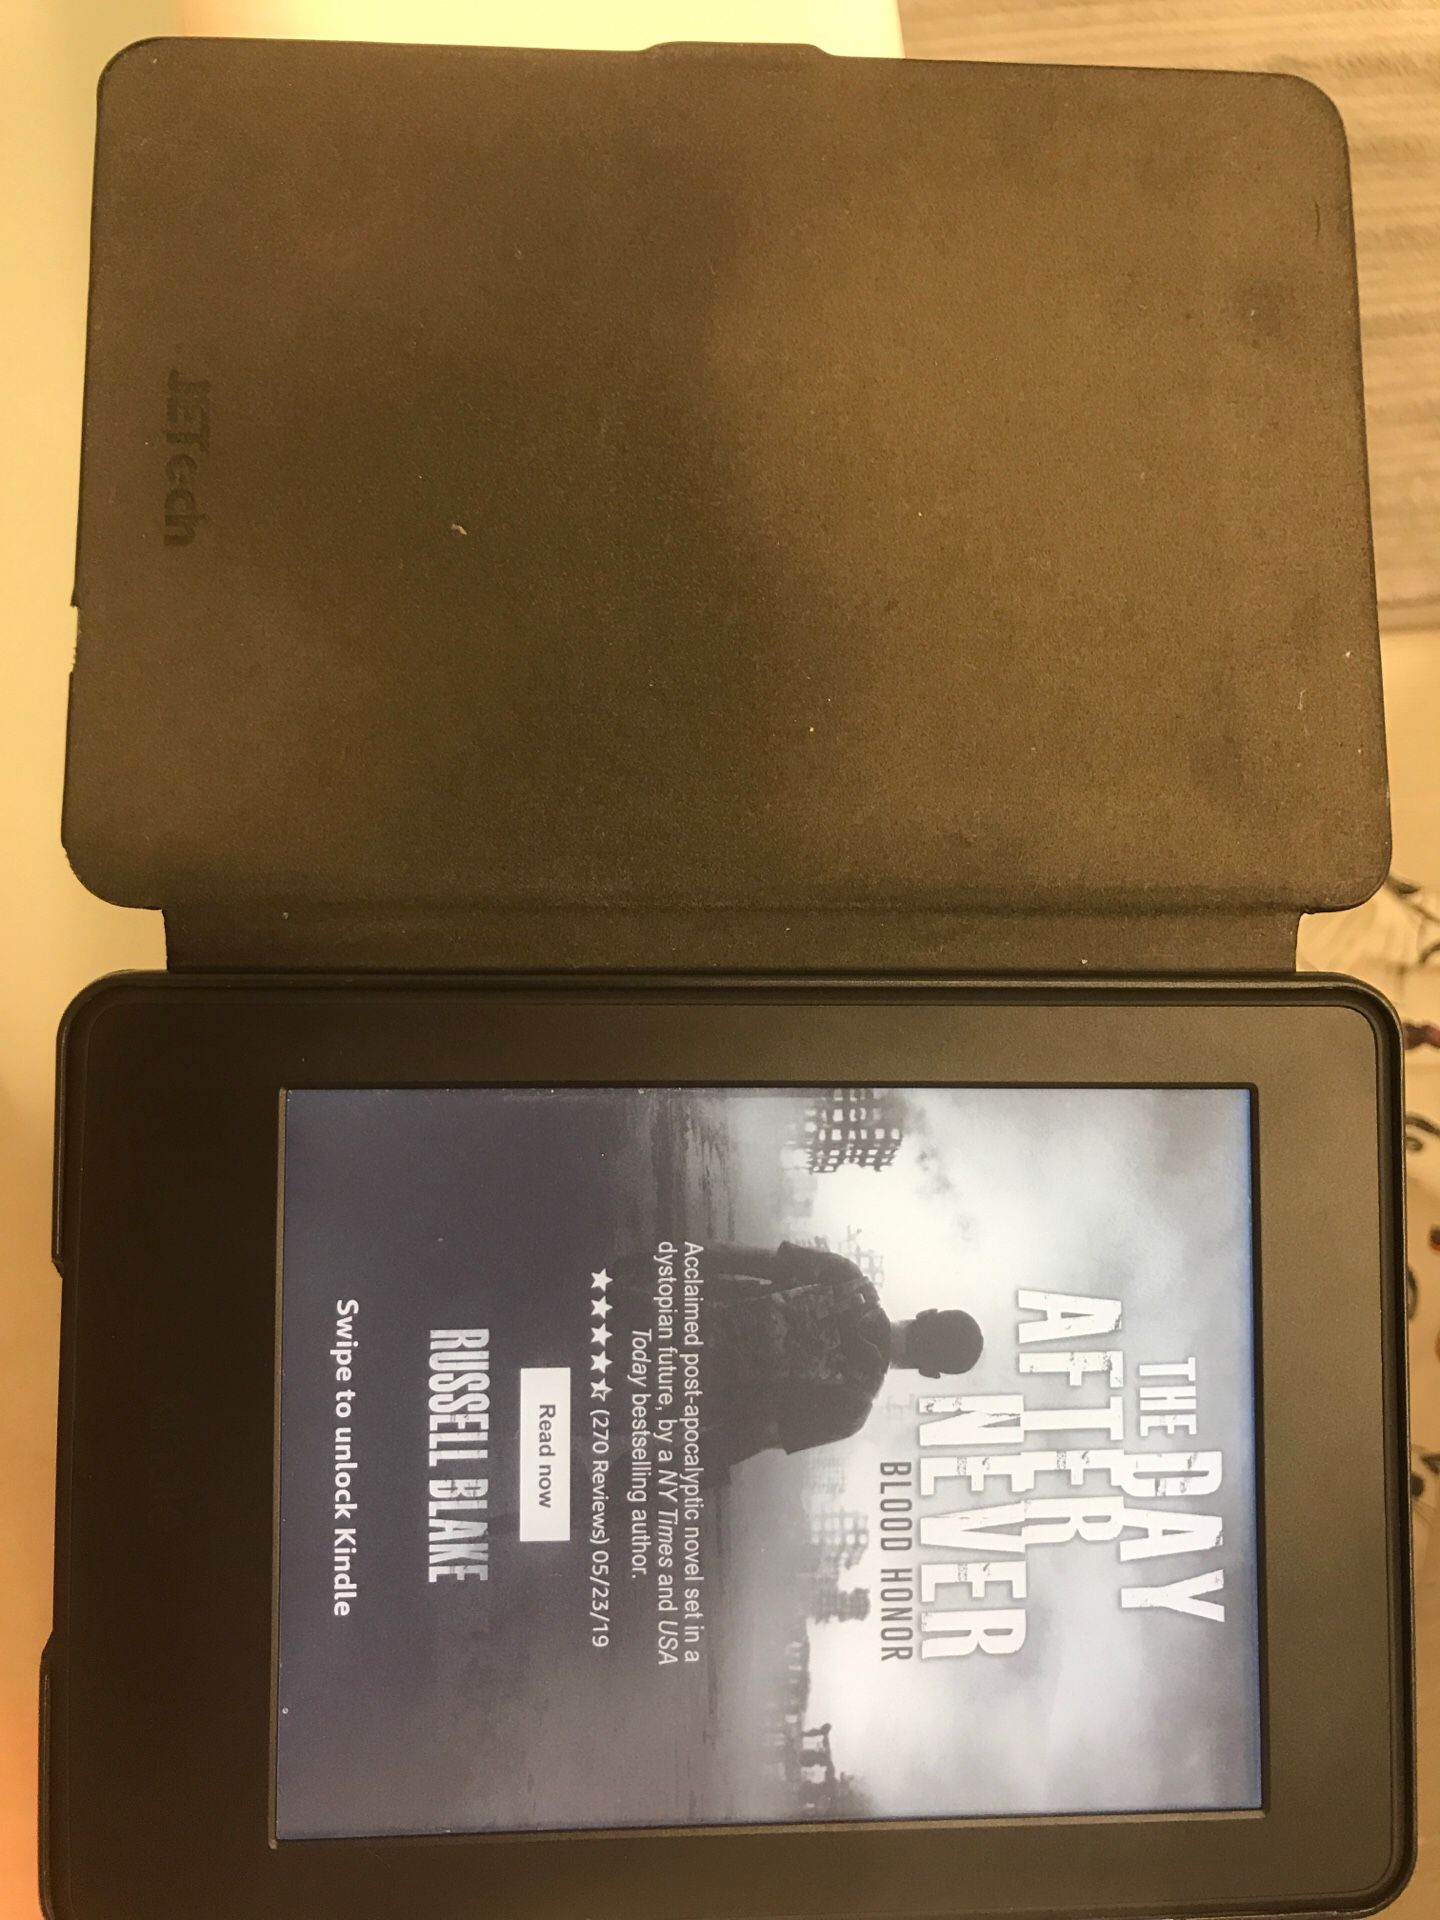 Kindle Paperwhite 7th generation